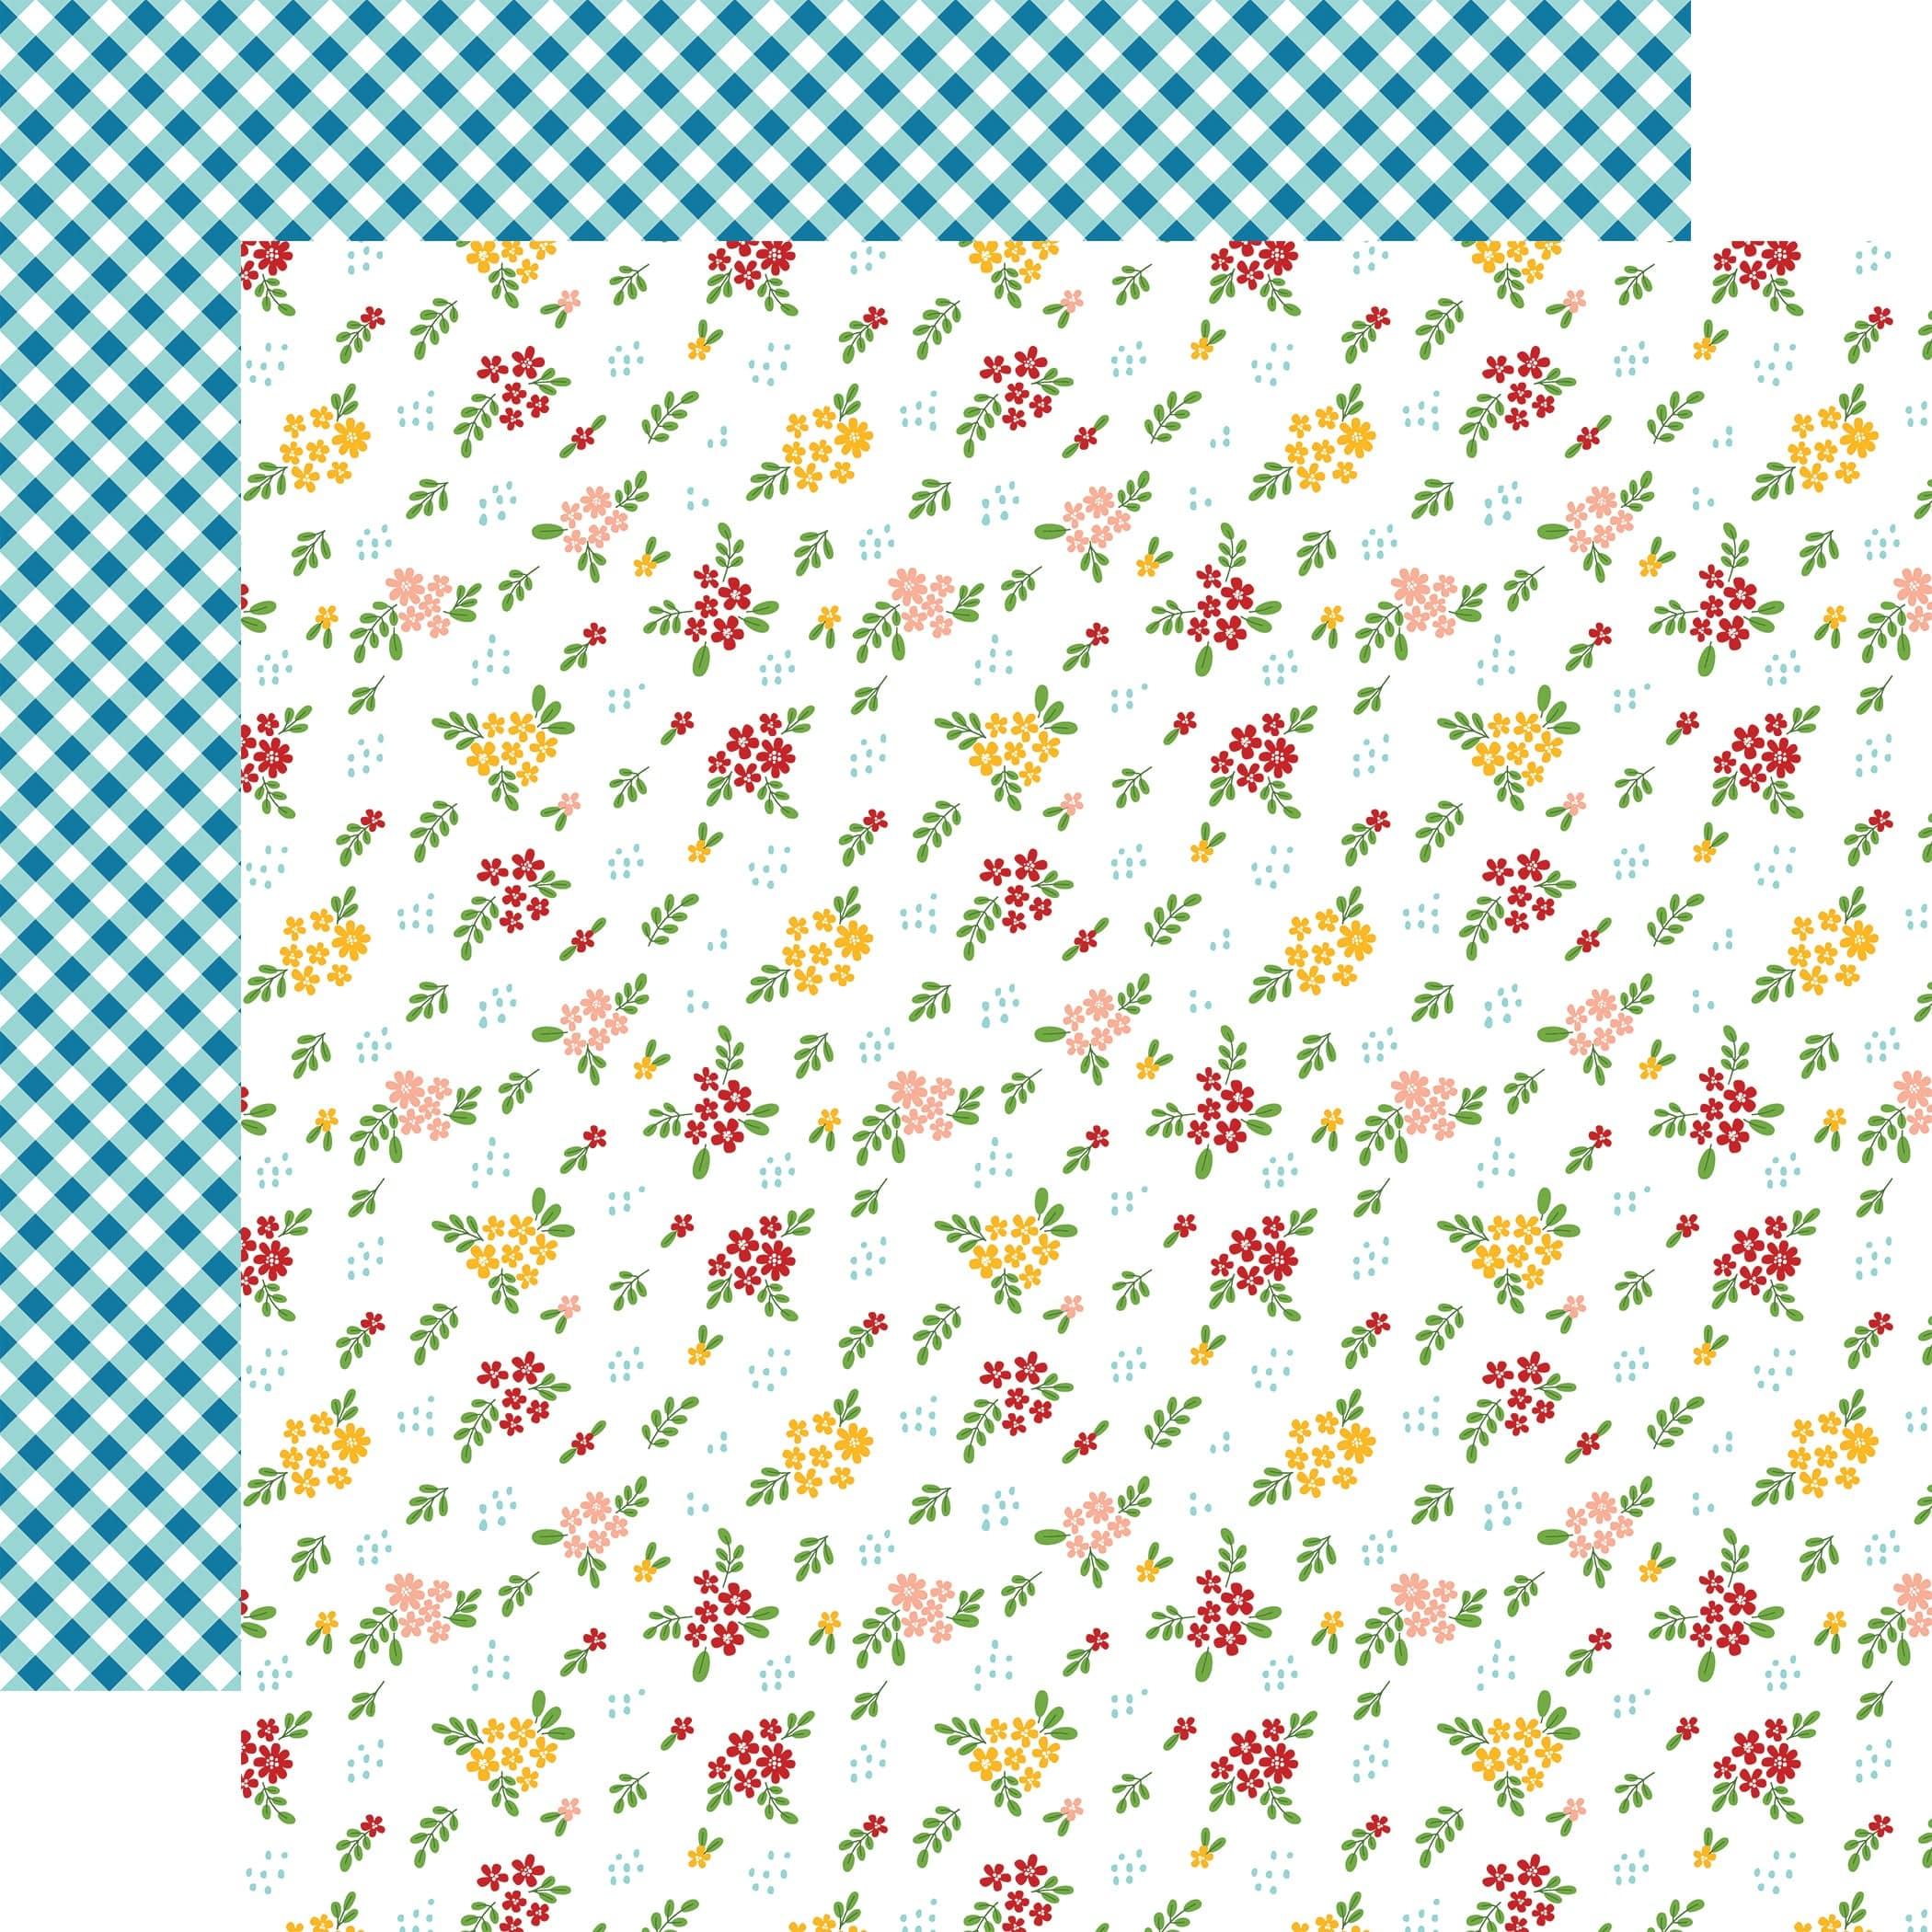 Fun On The Farm Collection Farm Flowers 12 x 12 Double-Sided Scrapbook Paper by Echo Park Paper - Scrapbook Supply Companies